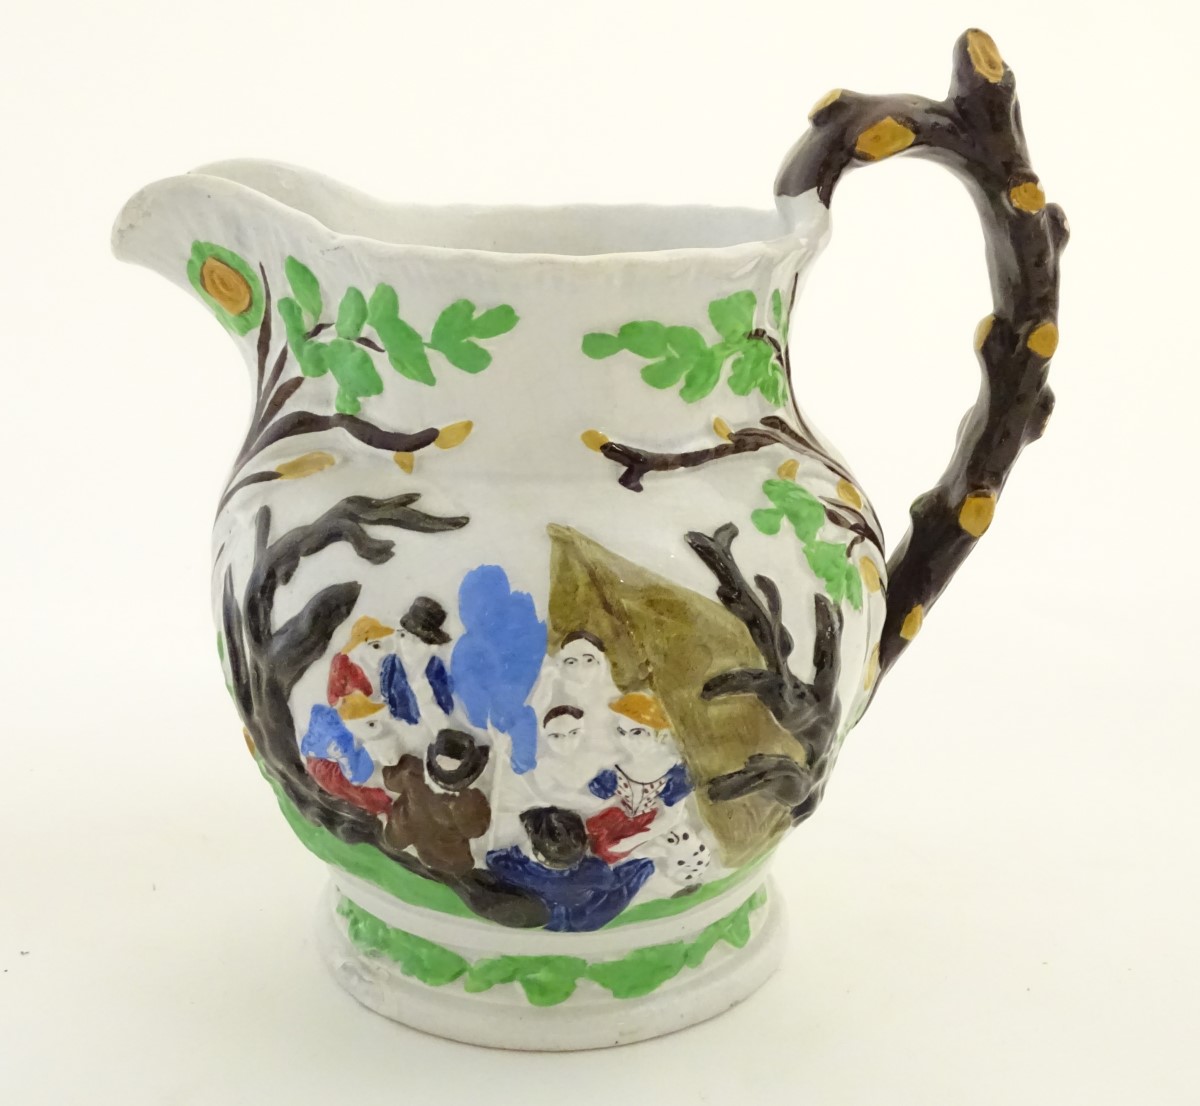 A 19thC Staffordshire Pottery Pratt style jug, depicting figures in a landscape with dogs, a horse, - Image 4 of 8